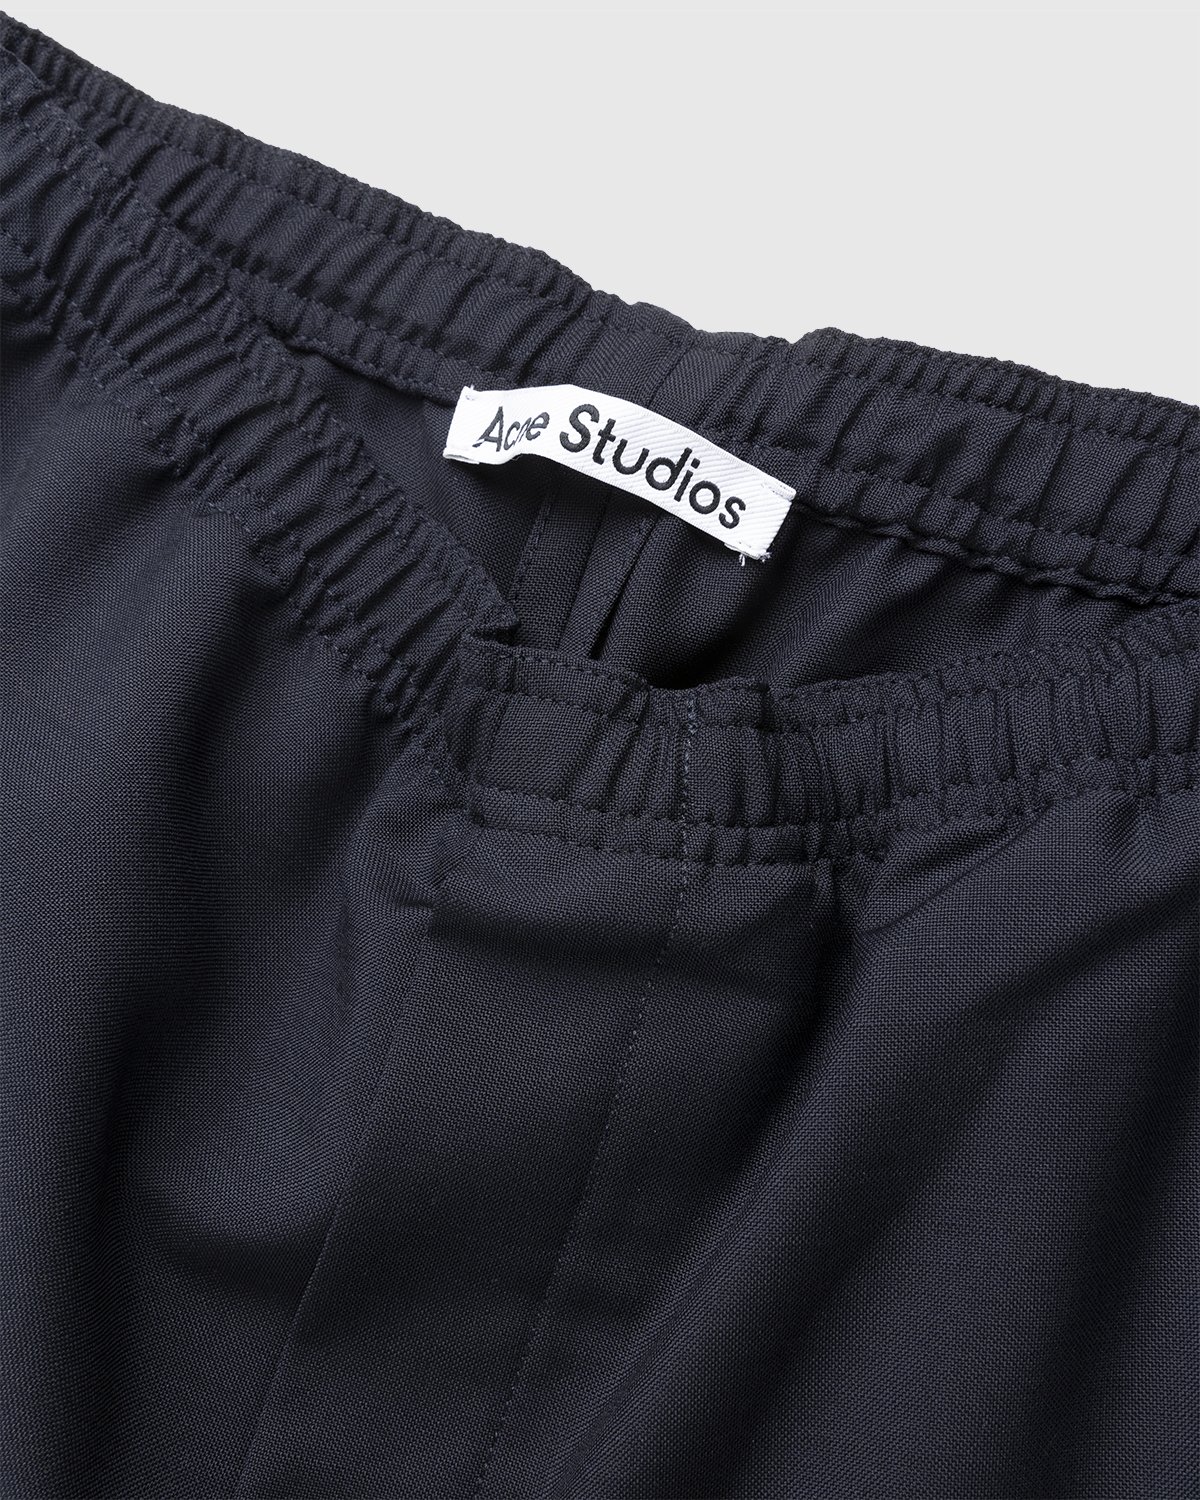 Acne Studios - Mohair Blend Drawstring Trousers Navy - Clothing - Blue - Image 4